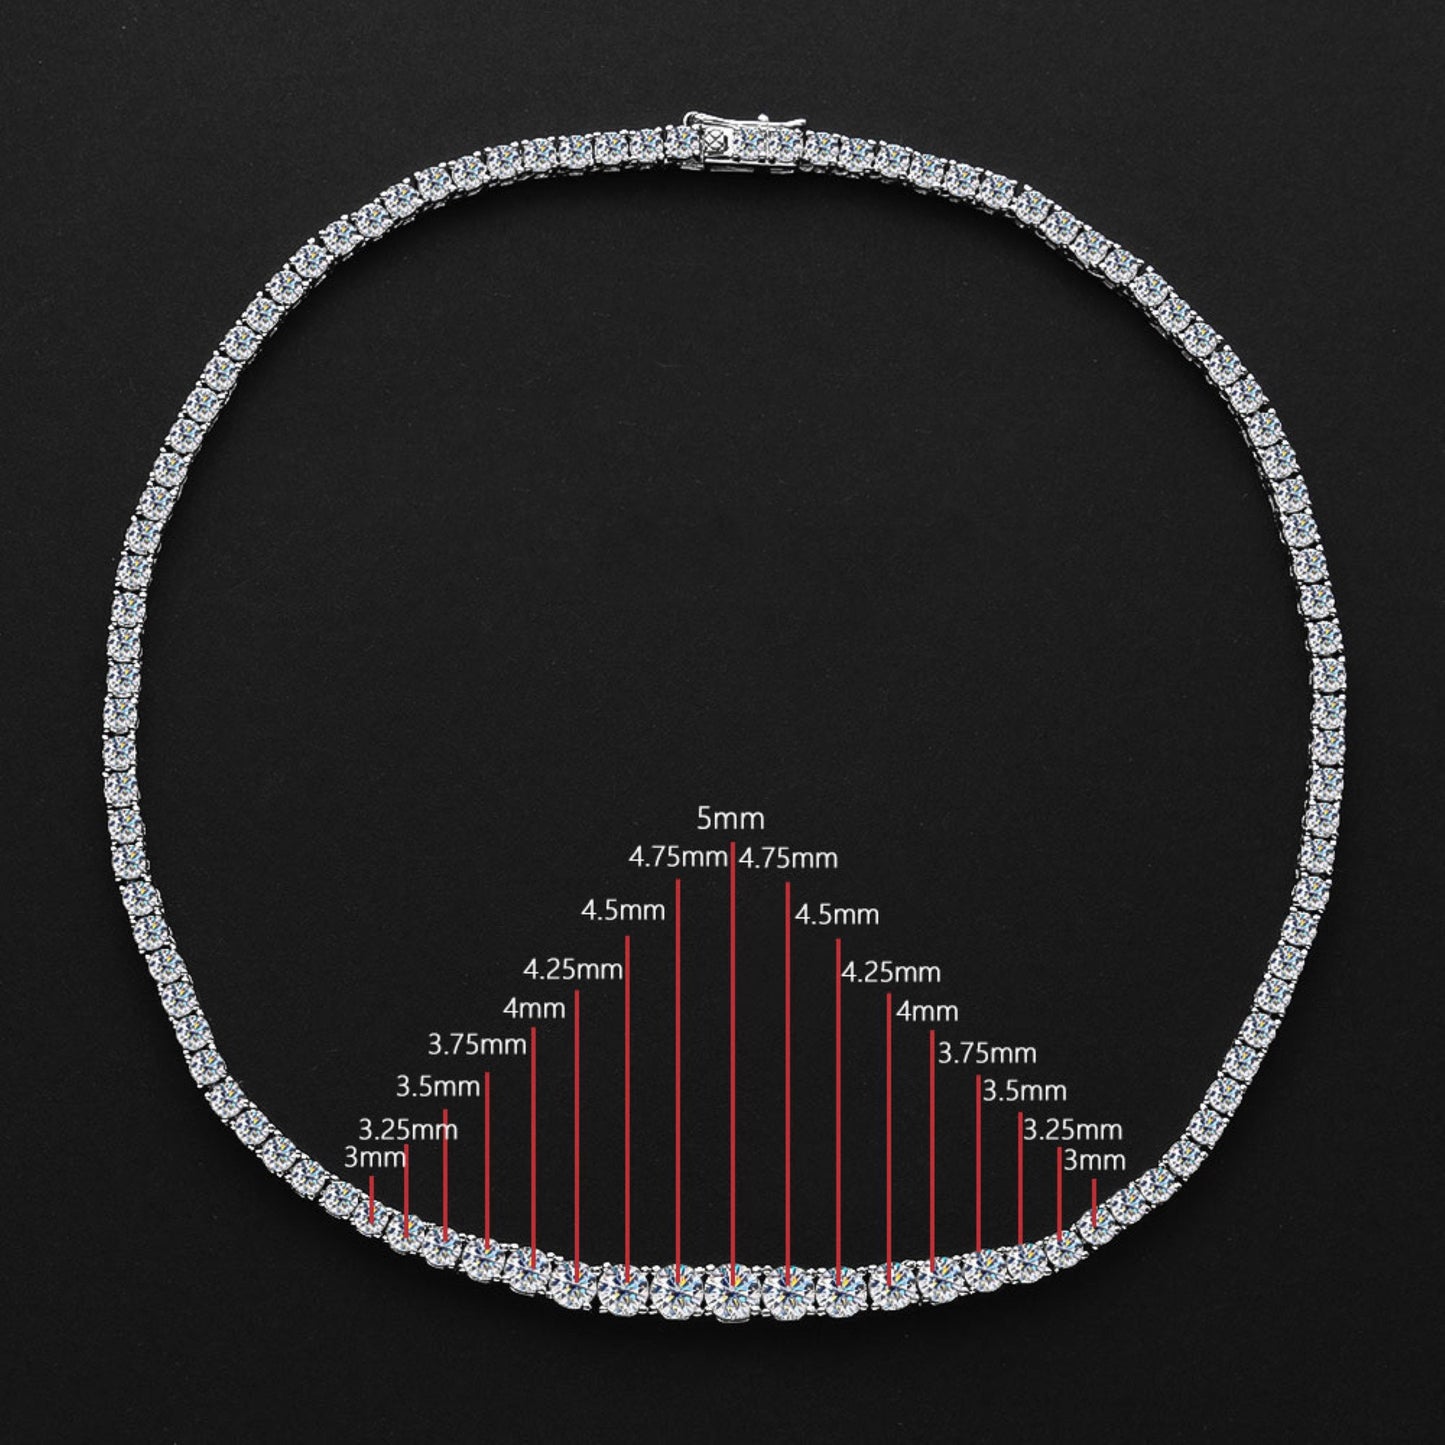 Tennis Necklace 3m  Round cut Diamond Necklace \ 925 Solid Sterling Silver Necklace \ 12carat Moissanite Tennis Necklace \ VVS1 Clarity GRA